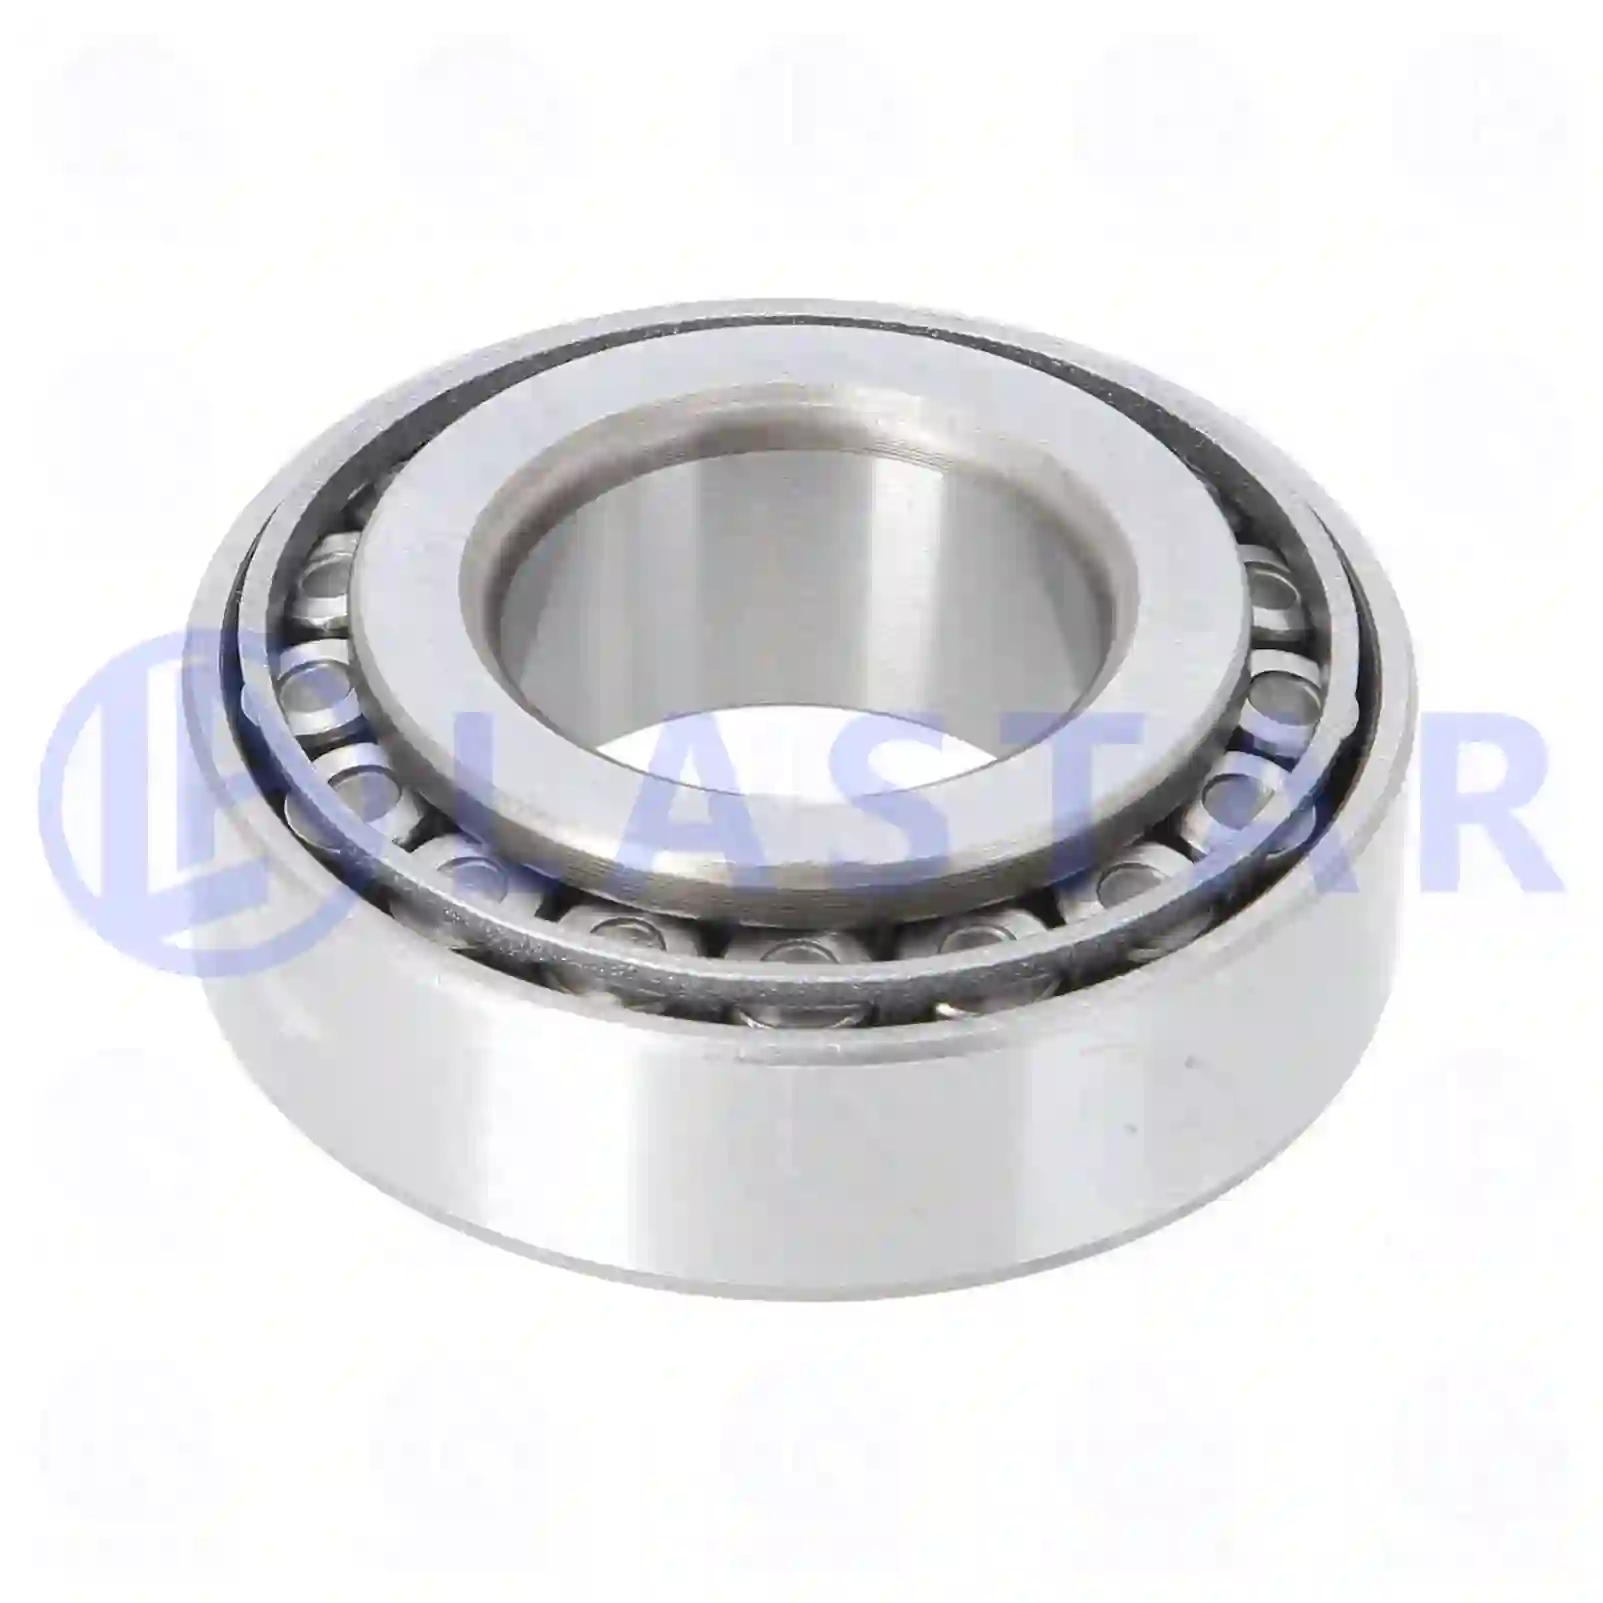 Bearings Tapered roller bearing, la no: 77724604 ,  oem no:290062240, 373022, 373518, 373519, 620049, 620053, 0491899, 1344221, 1400078, 140078, 164670, 491899, NAK9186, 900436601700, TK4210416, 00814138, 05996248, 26800120, 94020002, 94205016, 94249643, 5-09812025-0, 5-09812026-0, 5-09812027-0, 8-94249643-2, 9-00032206-0, 01100000, 01110000, 01905272, 05996248, 08835016, 08857787, 00755-27210, 00632499006, 06324990066, 06324990080, 06342990066, A0023432206, A0773220600, 075527210, 805127142, 0009813105, 000720032206, 0019811505, 0019816105, 0019816505, 0029801302, 0079817605, MB025004, MH043145, 32273-M5100, 38120-18000, 38120-1KD0A, 466667, 373022, 373518, 373519, 620049, 620053, 0007732206, 0023336266, 0023432206, 0959232206, 5516010506, 5516016470, 5516016472, 7703090085, 123631, 183583, 19553, 6601861, 7019553, ZG03022-0008 Lastar Spare Part | Truck Spare Parts, Auotomotive Spare Parts